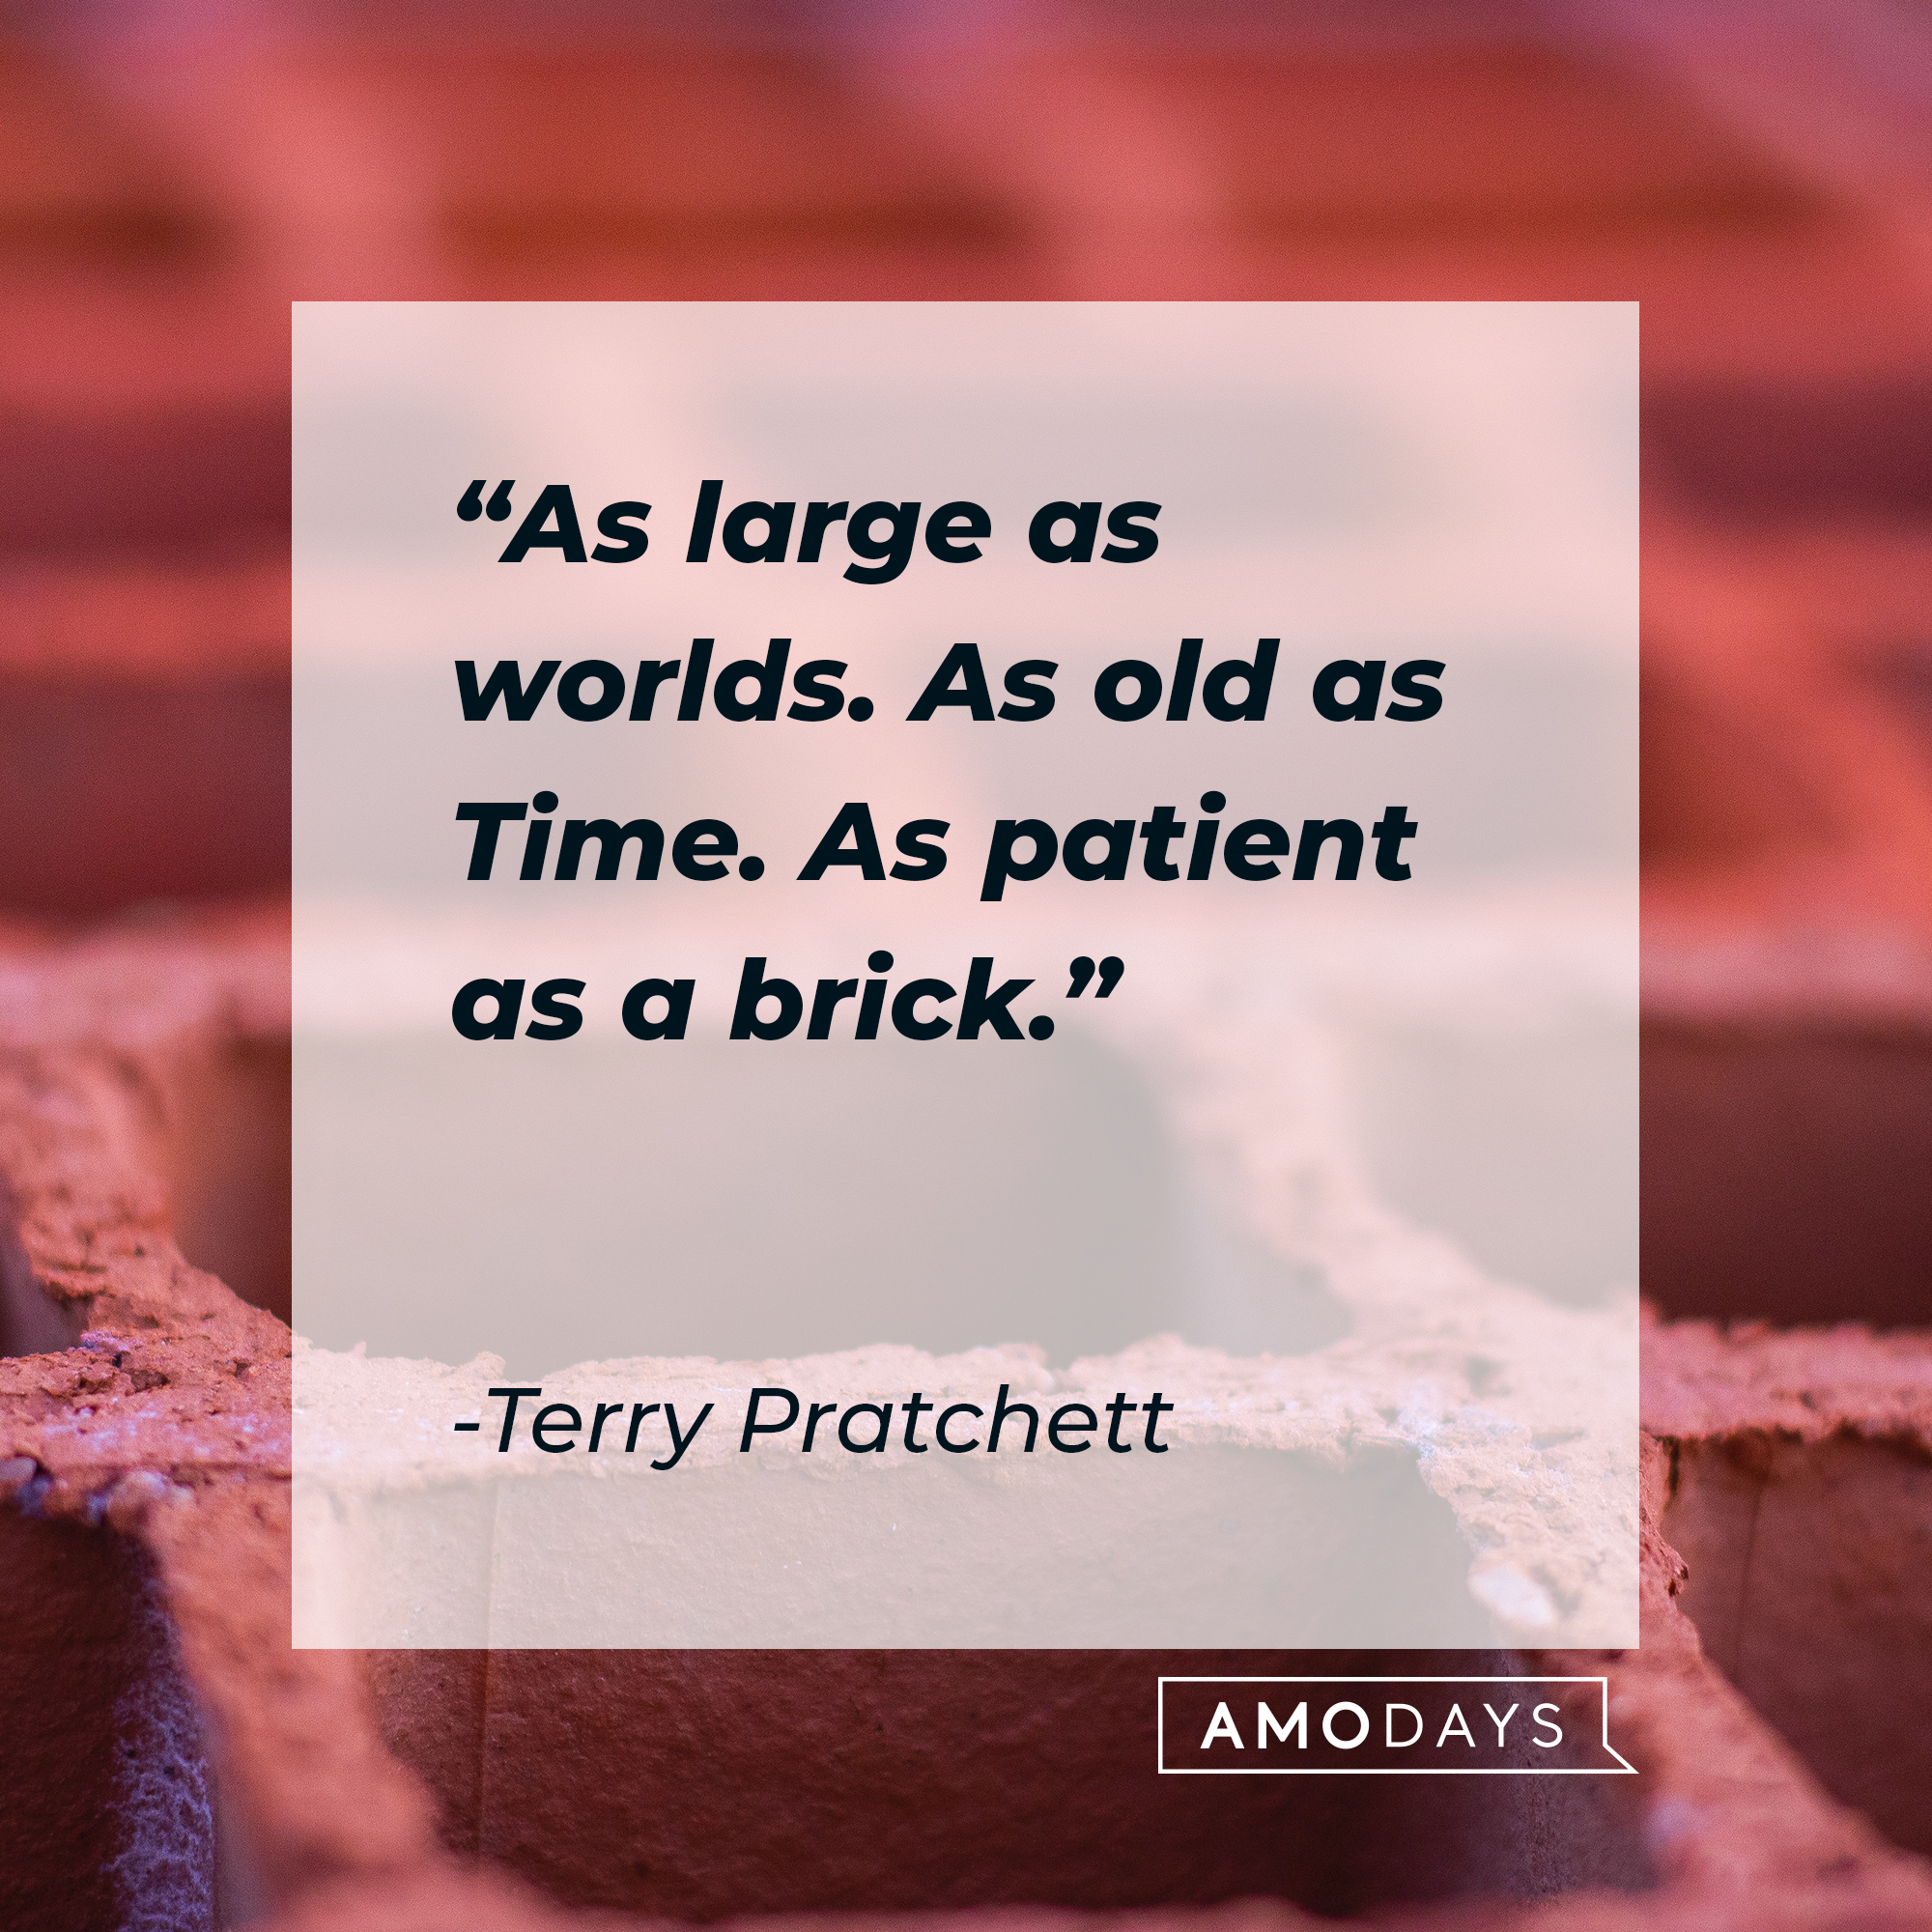 Terry Pratchett's quote: "As large as worlds. As old as Time. As patient as a brick." | Source: Unsplash